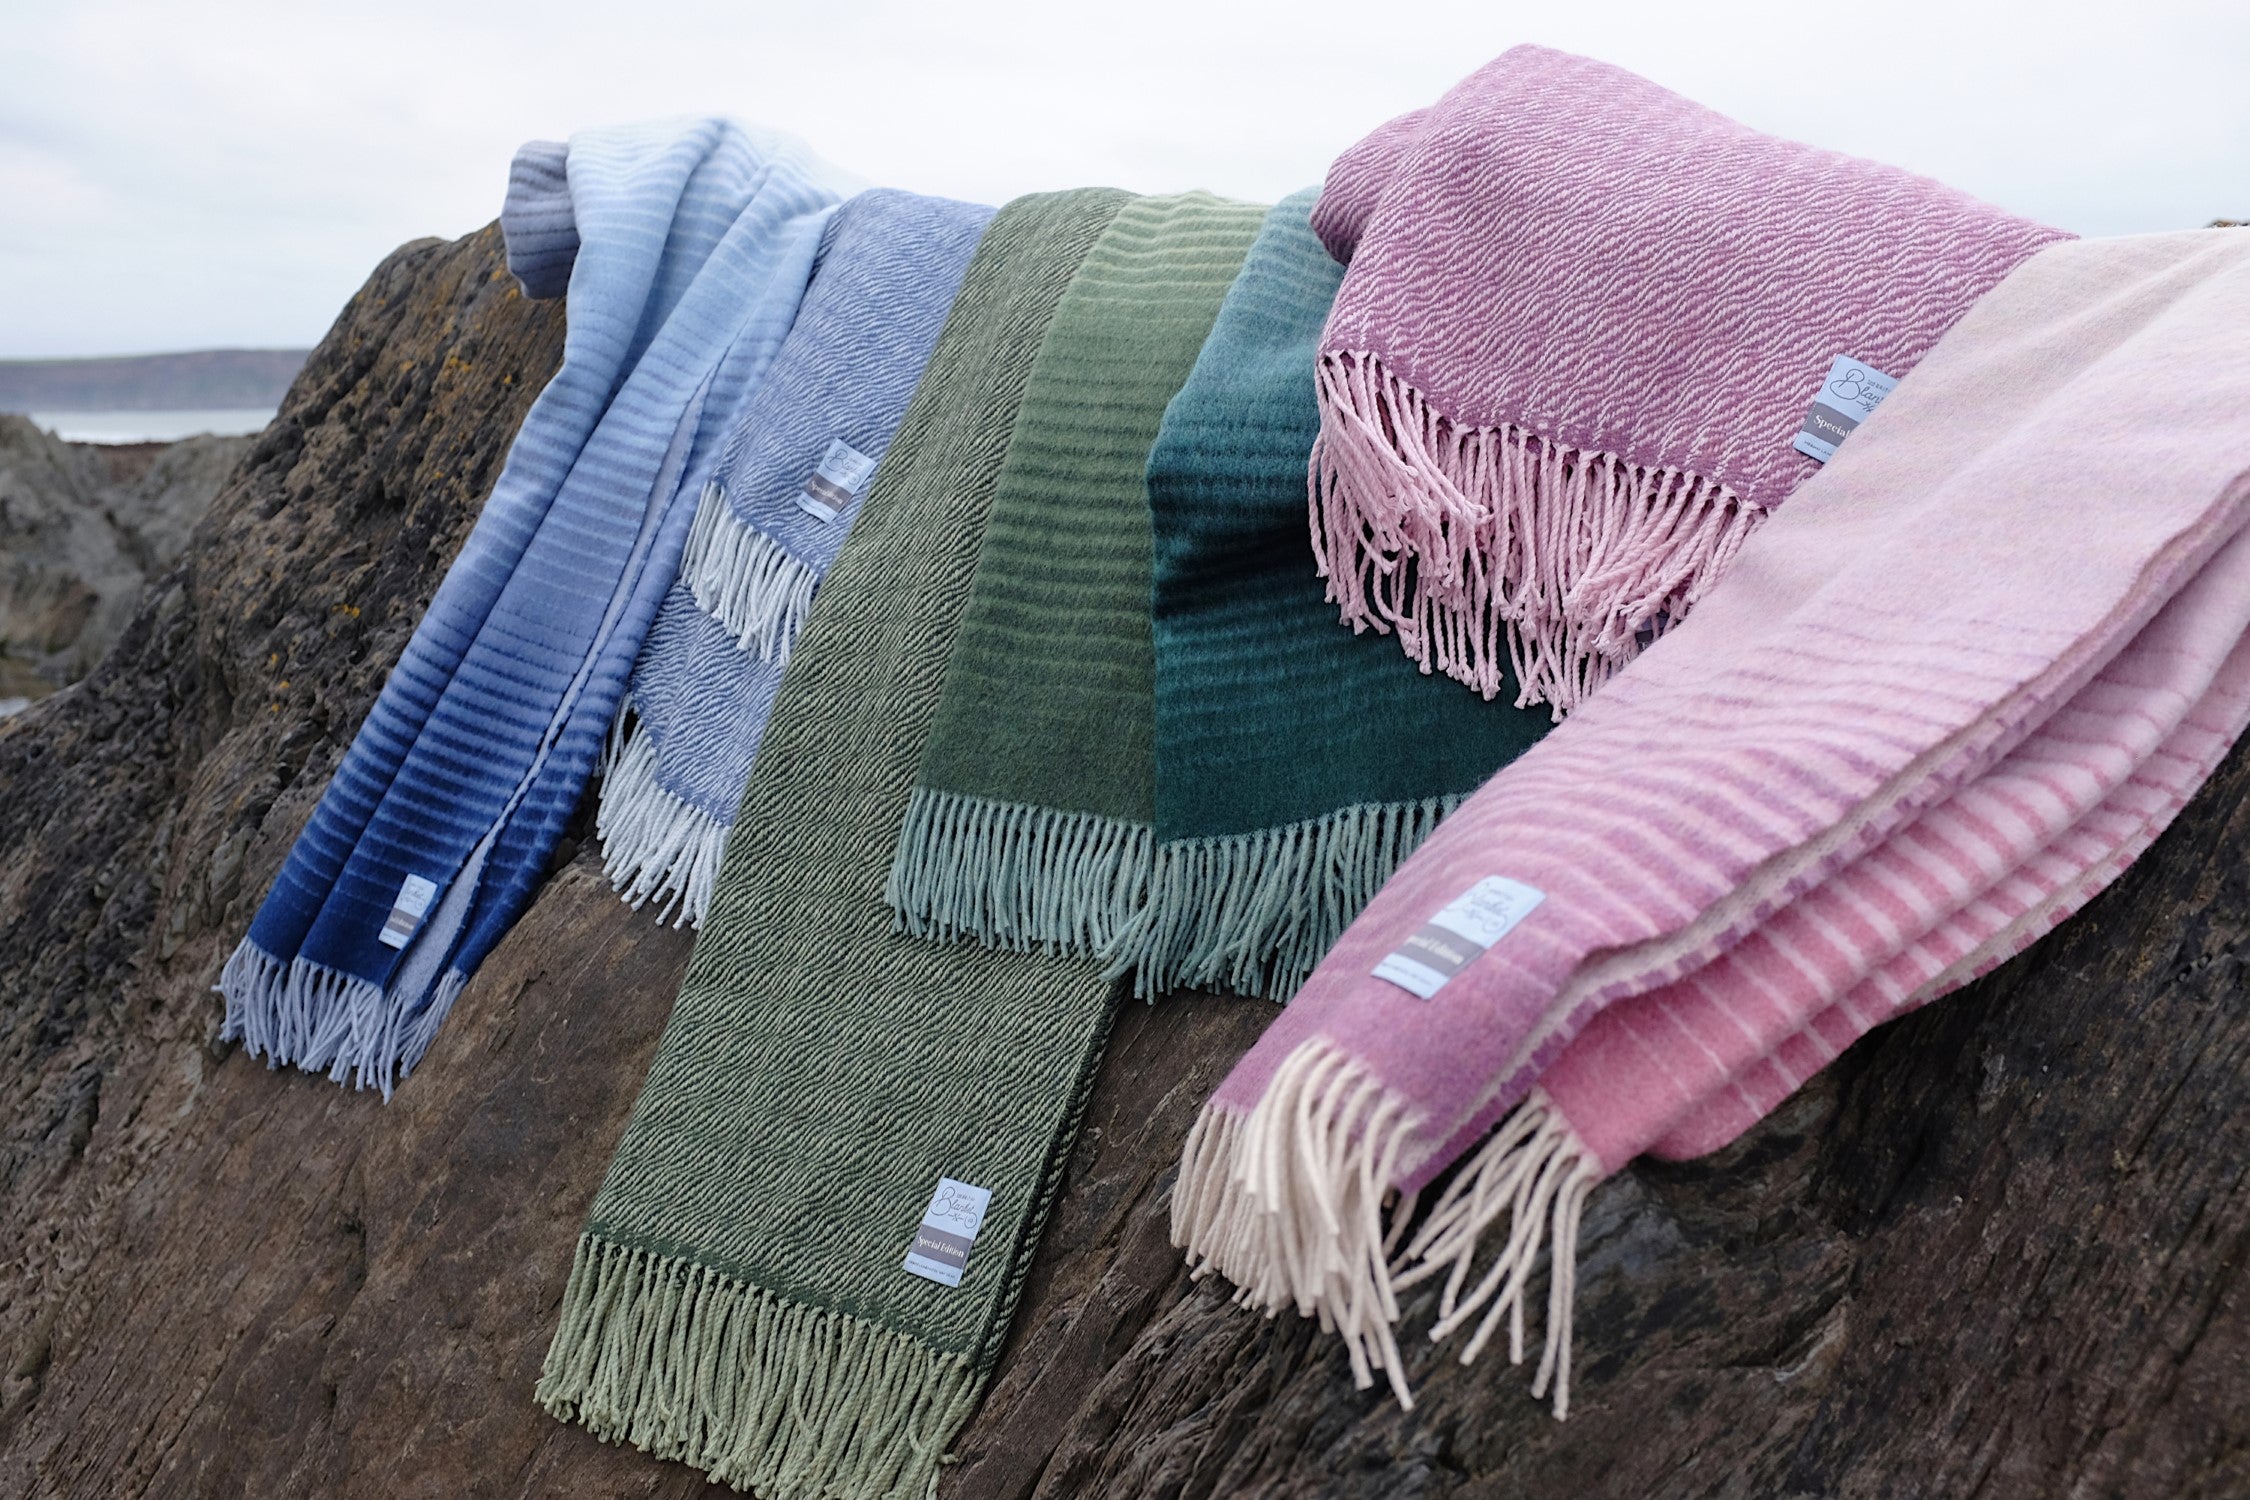 wool blankets. super soft blankets. pink blanket. green blanket. blue blanket. UK wool blankets. British blanket company. 100% wool. No synthetic fibers. Wool blankets made in the UK. Free UK shipping. super soft blankets. Large blankets